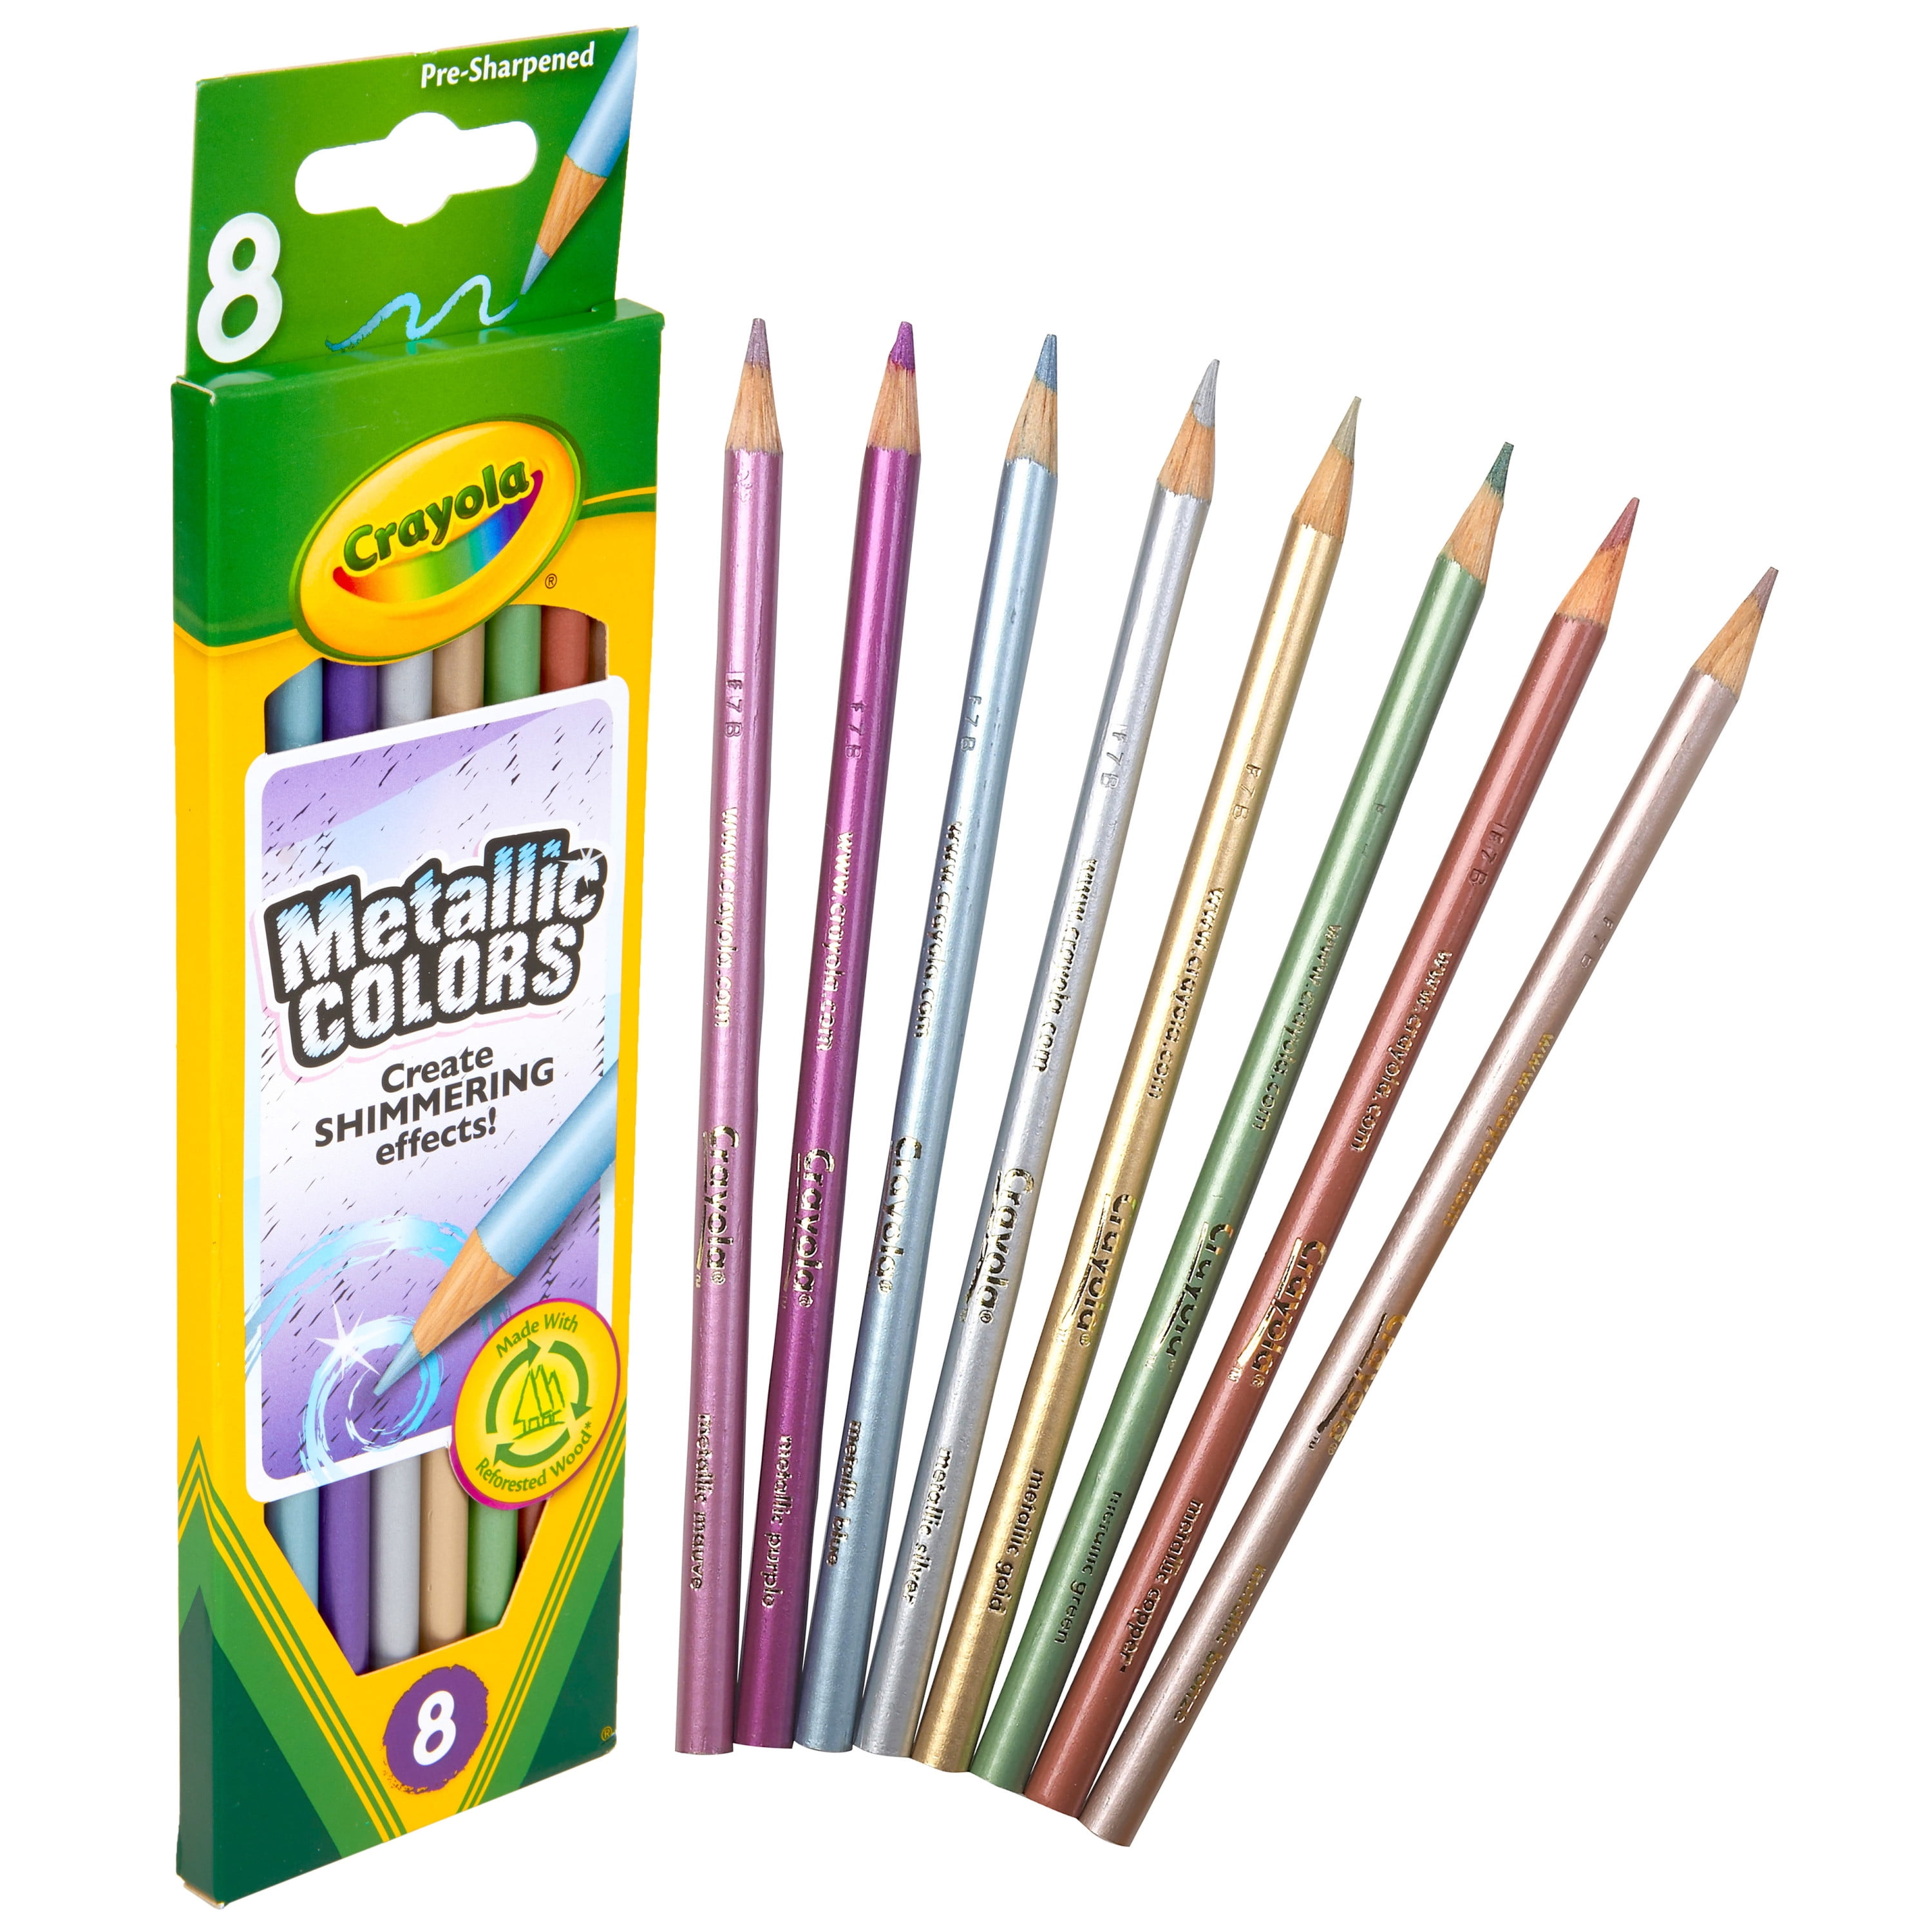 Crayola: Colors of the World Colored Pencils (8 pack)